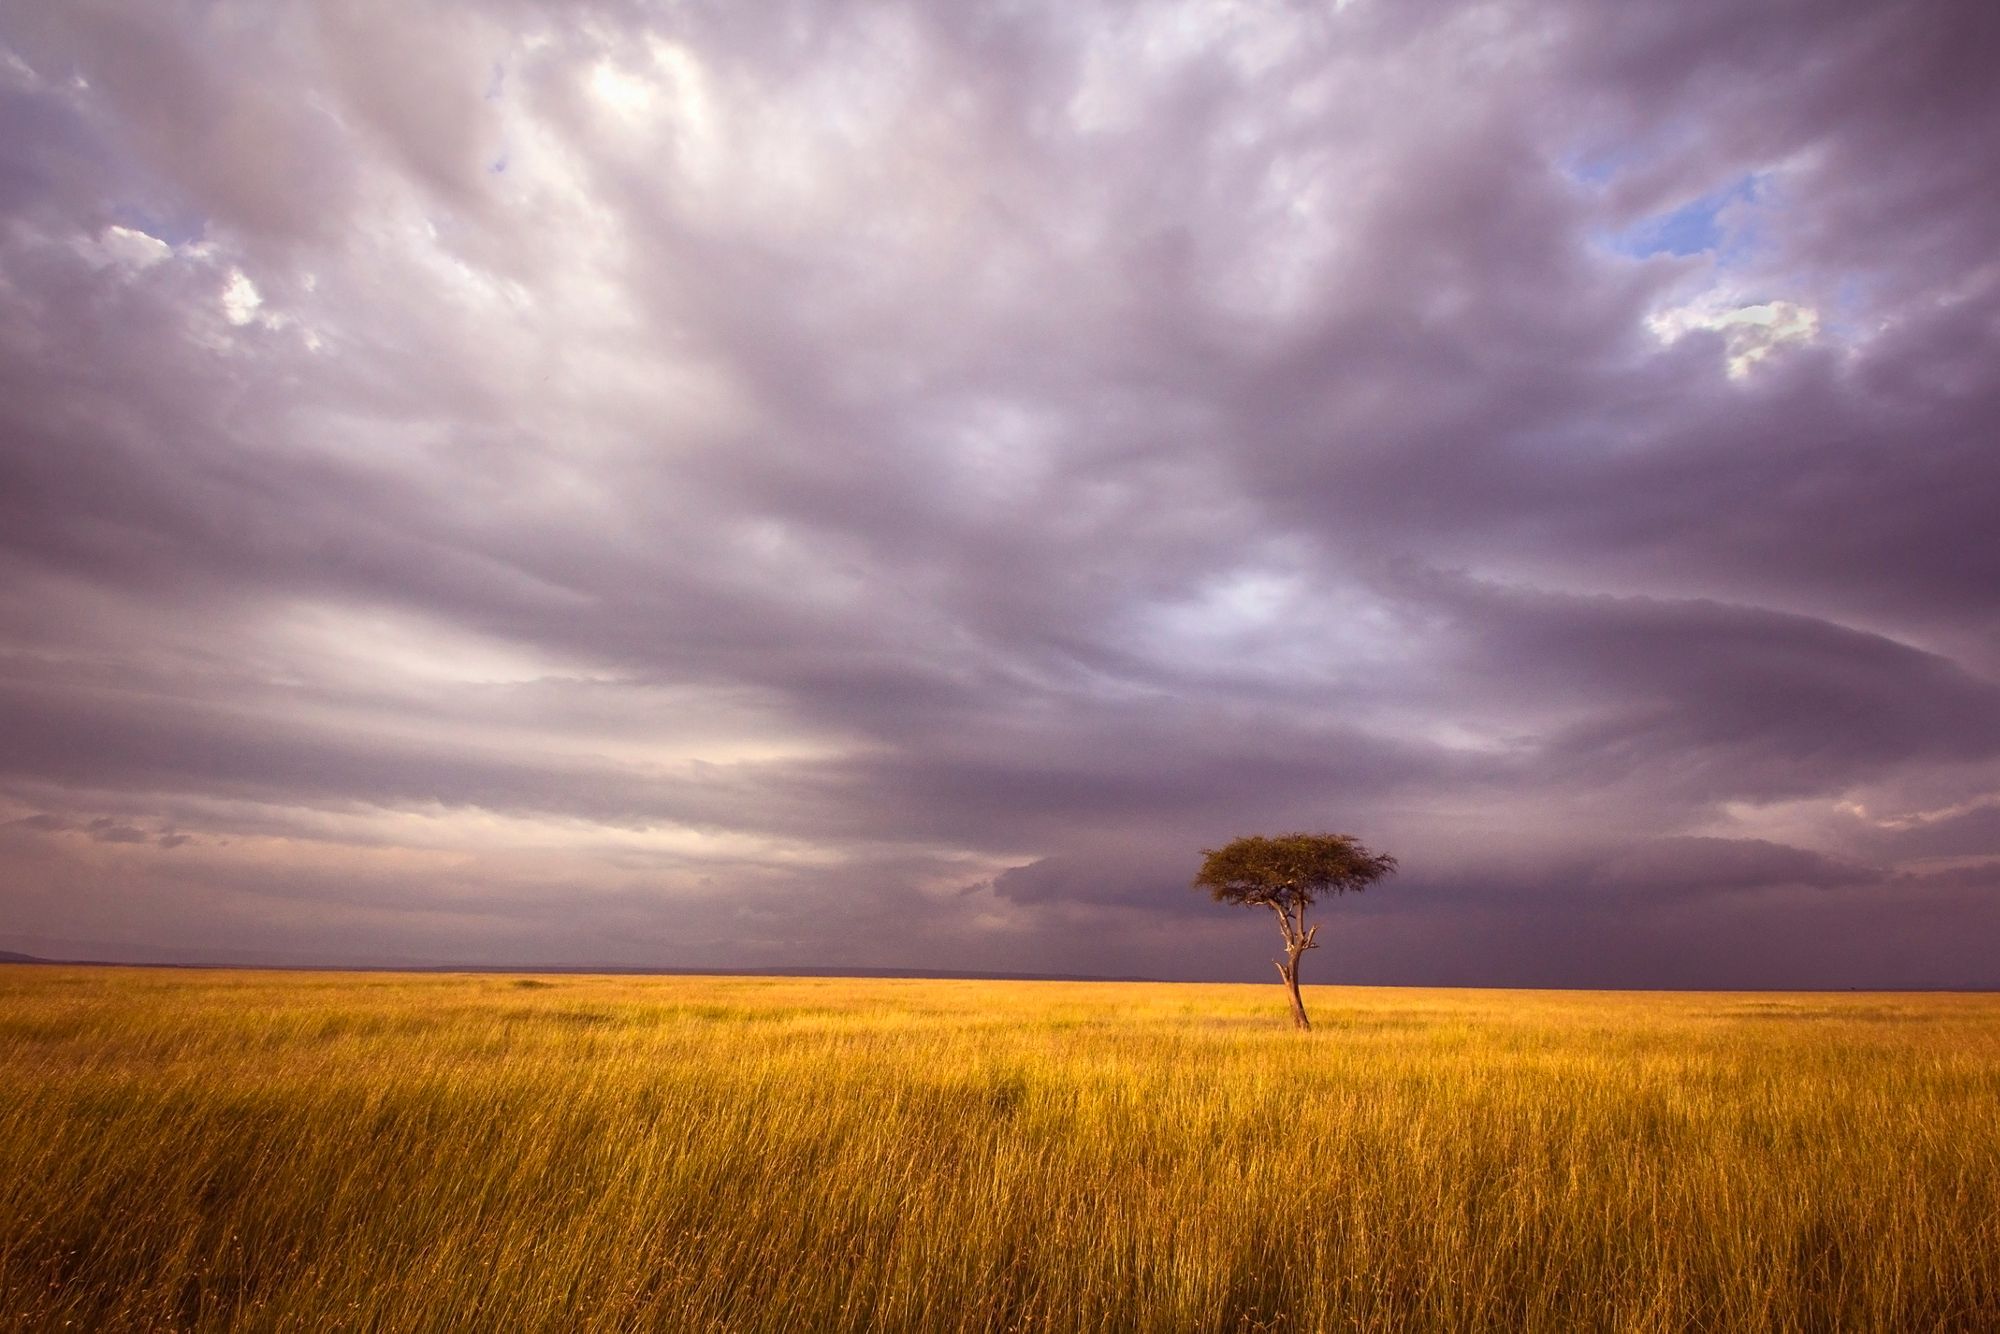 Acacia tree surrounded by grassland in Western Kenya. Photo: William Llewelyn Davies/IFC